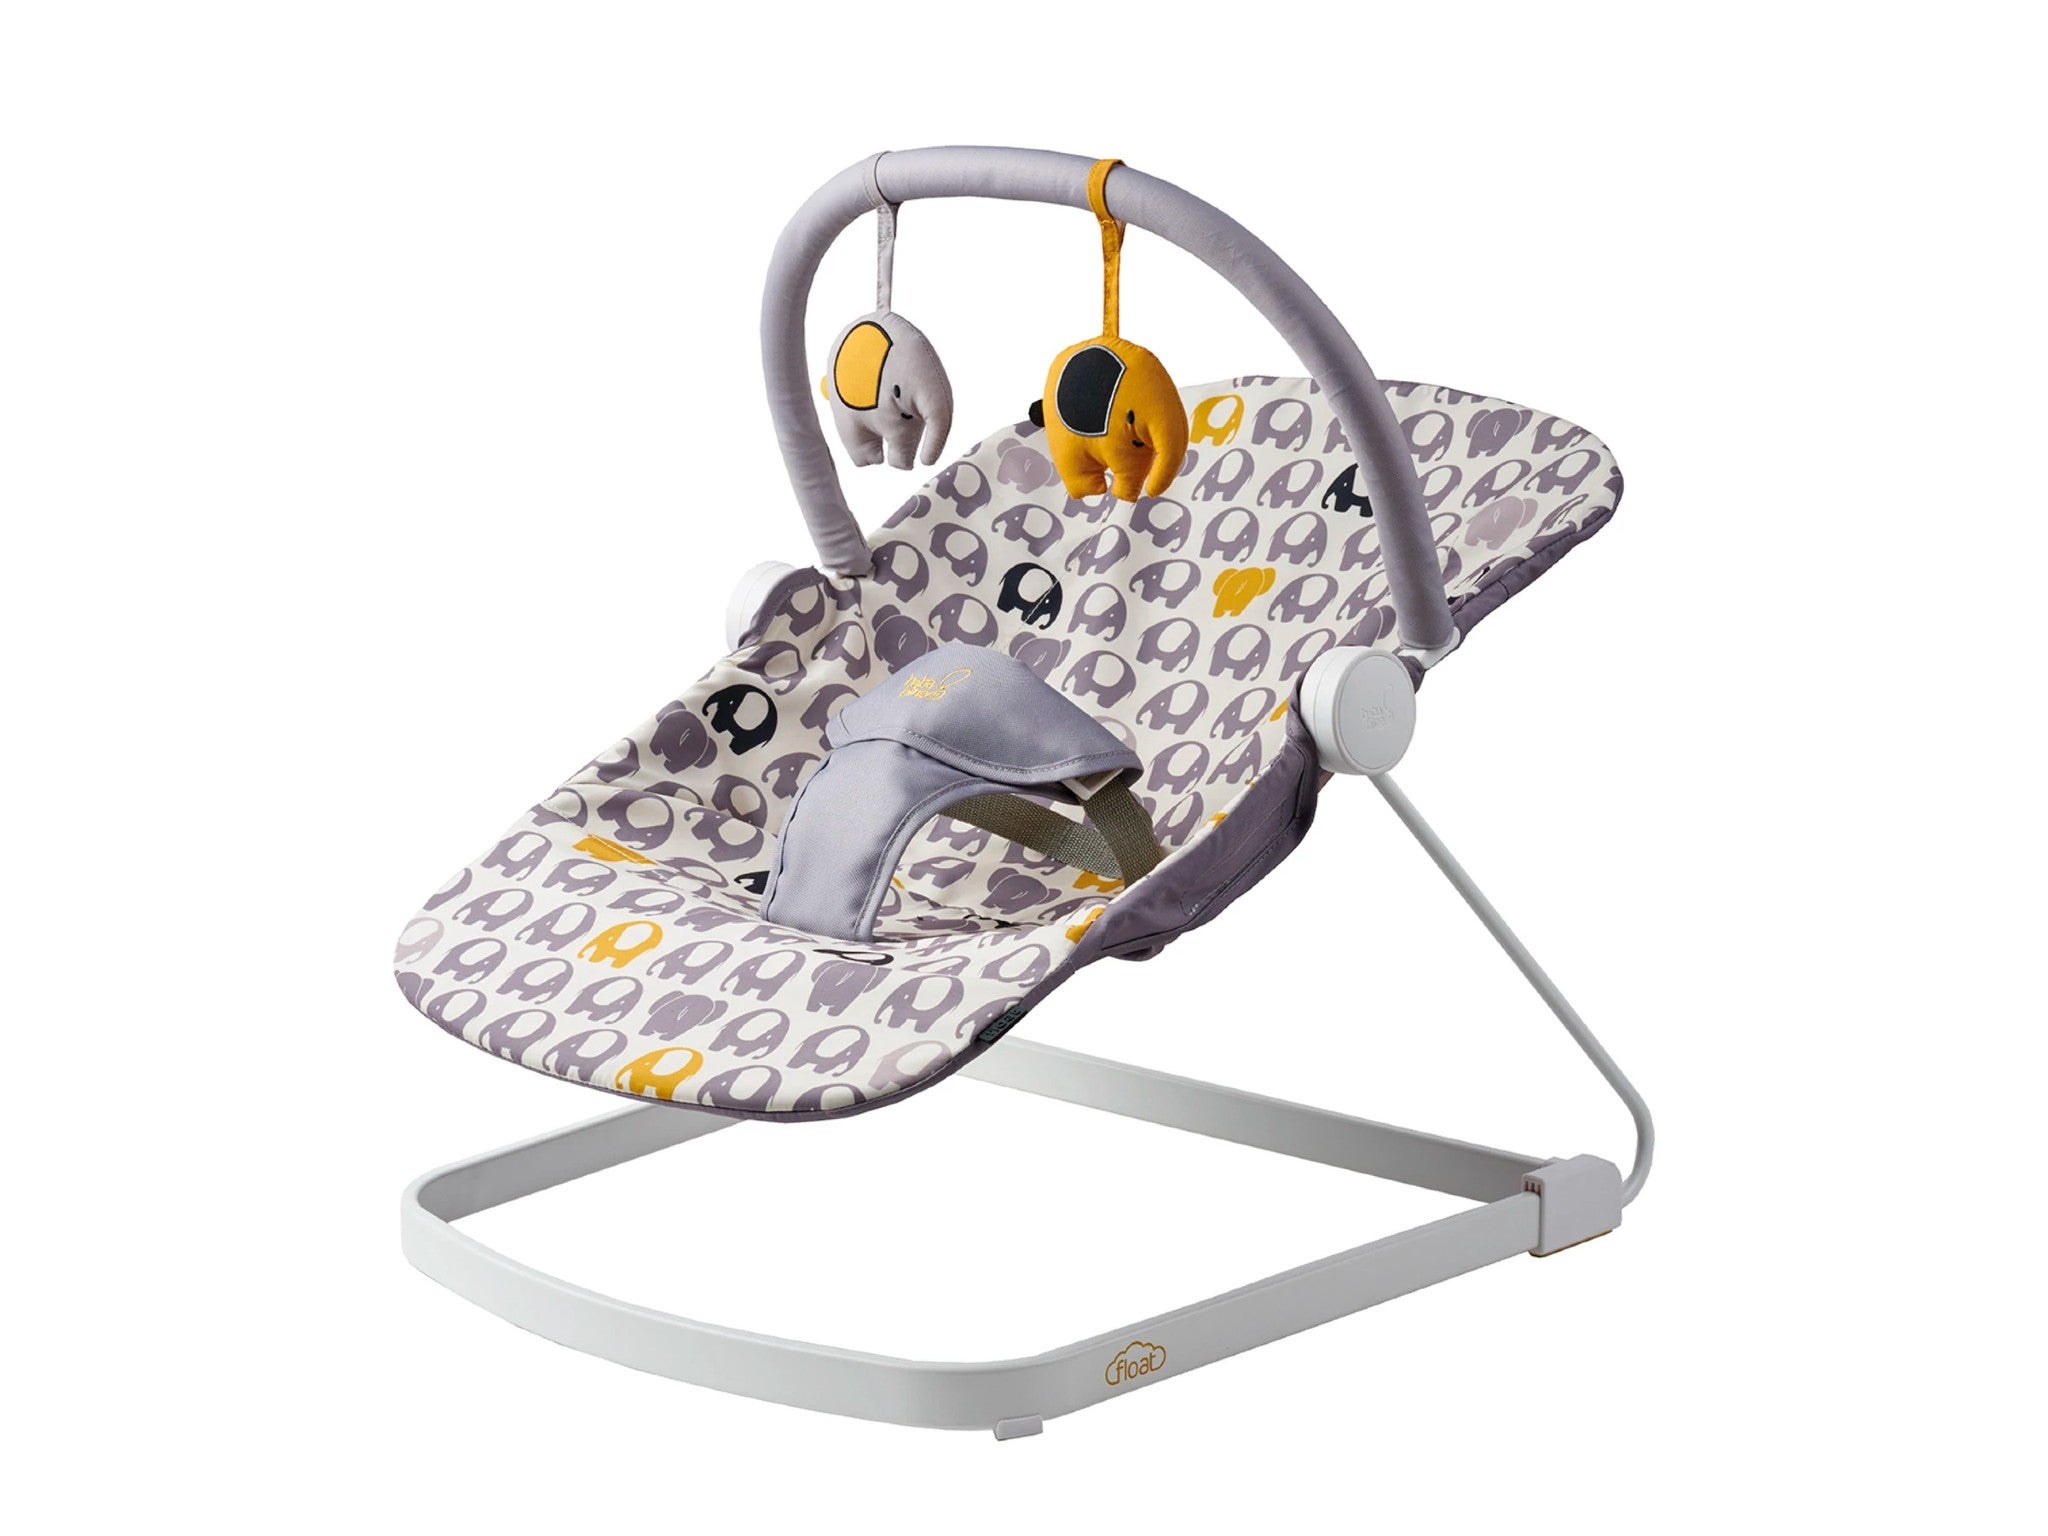 BabaBing! float baby bouncer indybest